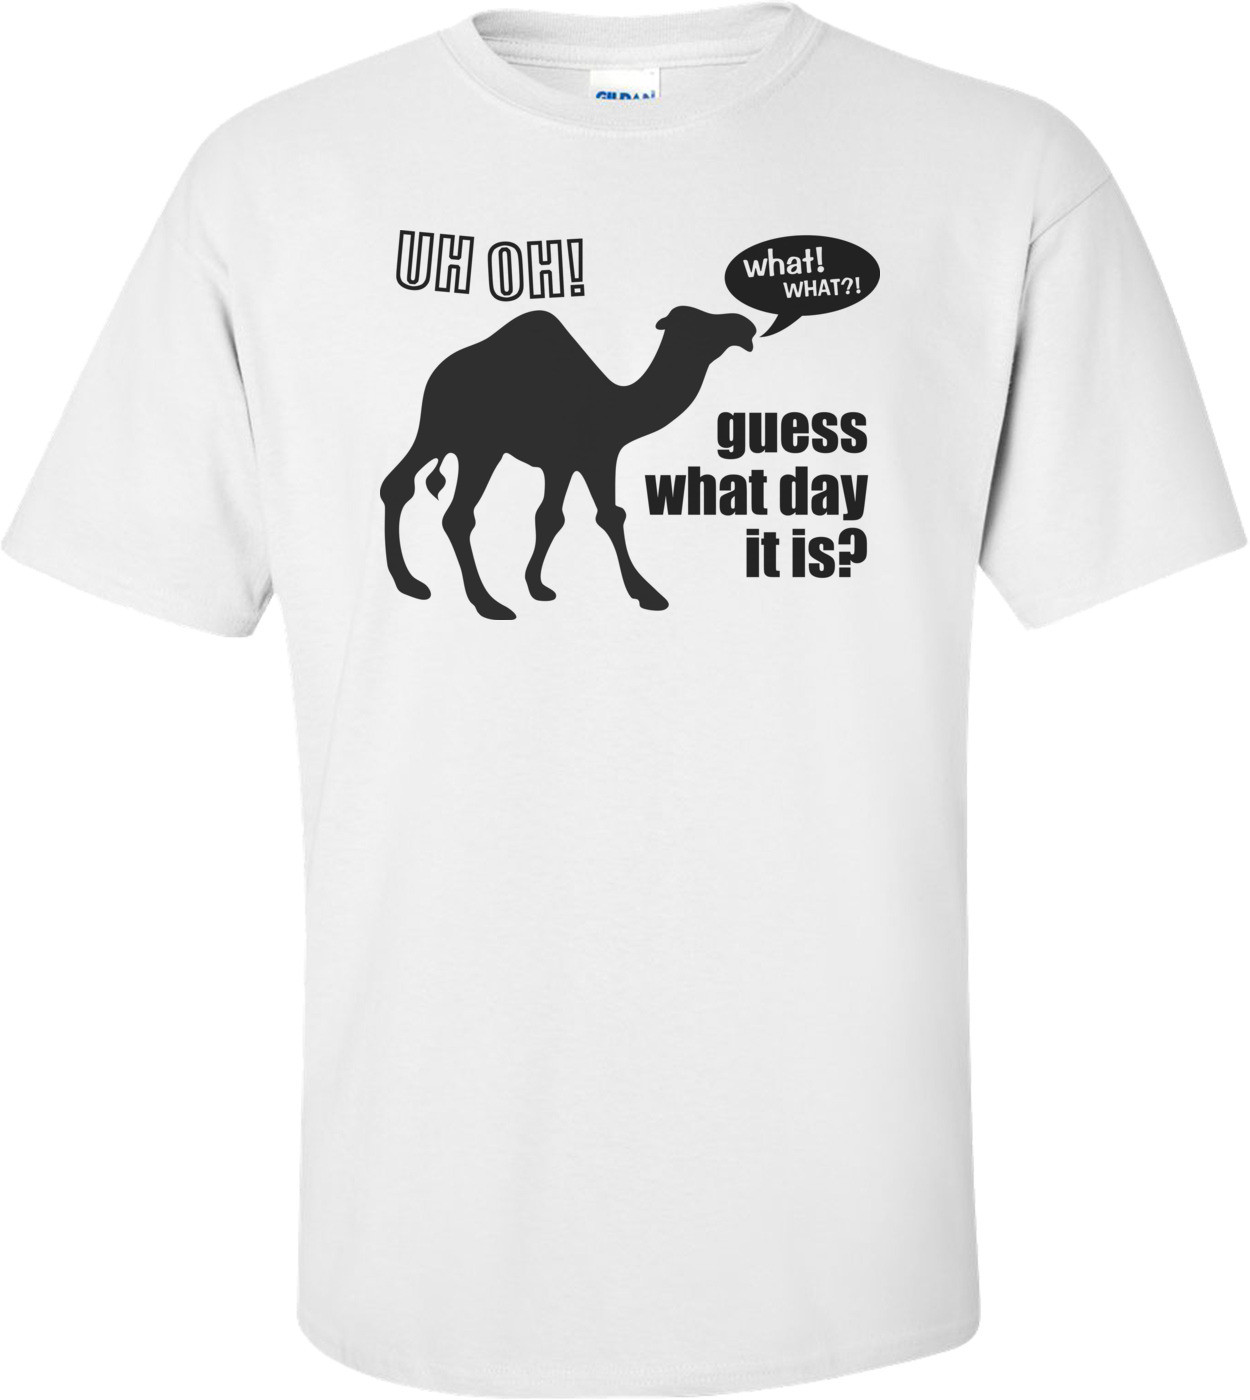 Guess What Day It Is Hump Day Camel Shirt